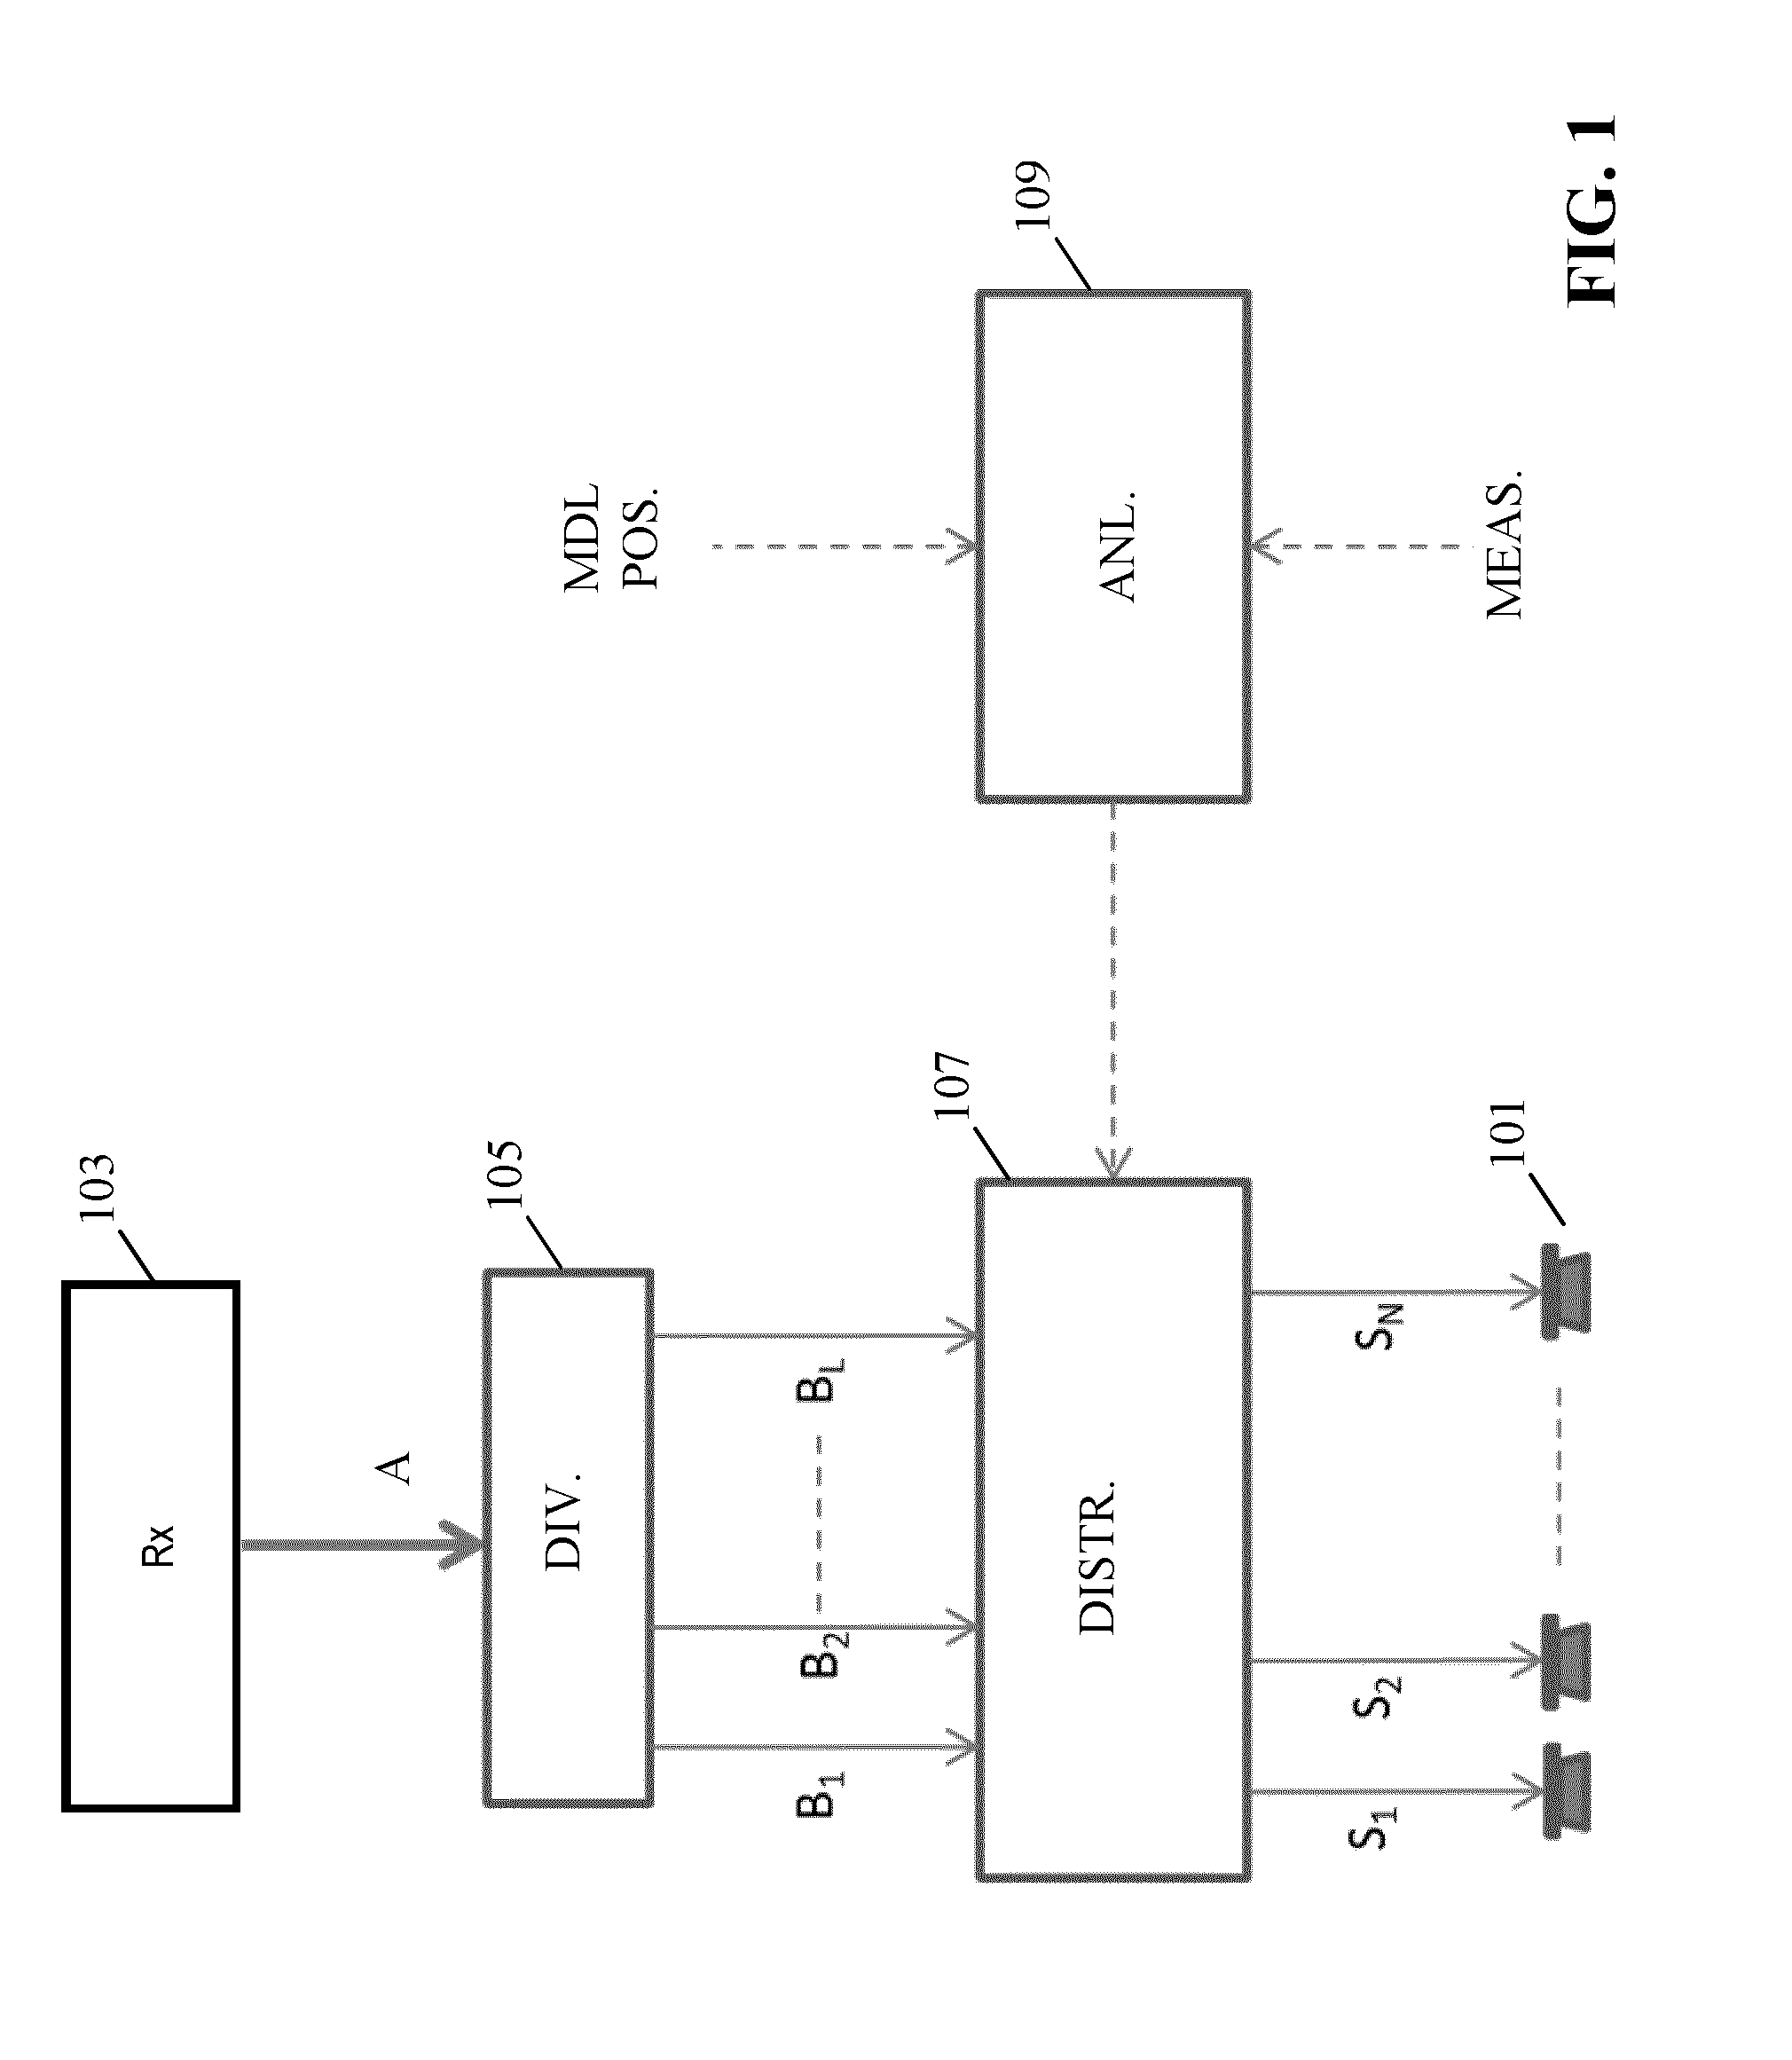 Method and apparatus for generating drive signals for loudspeakers